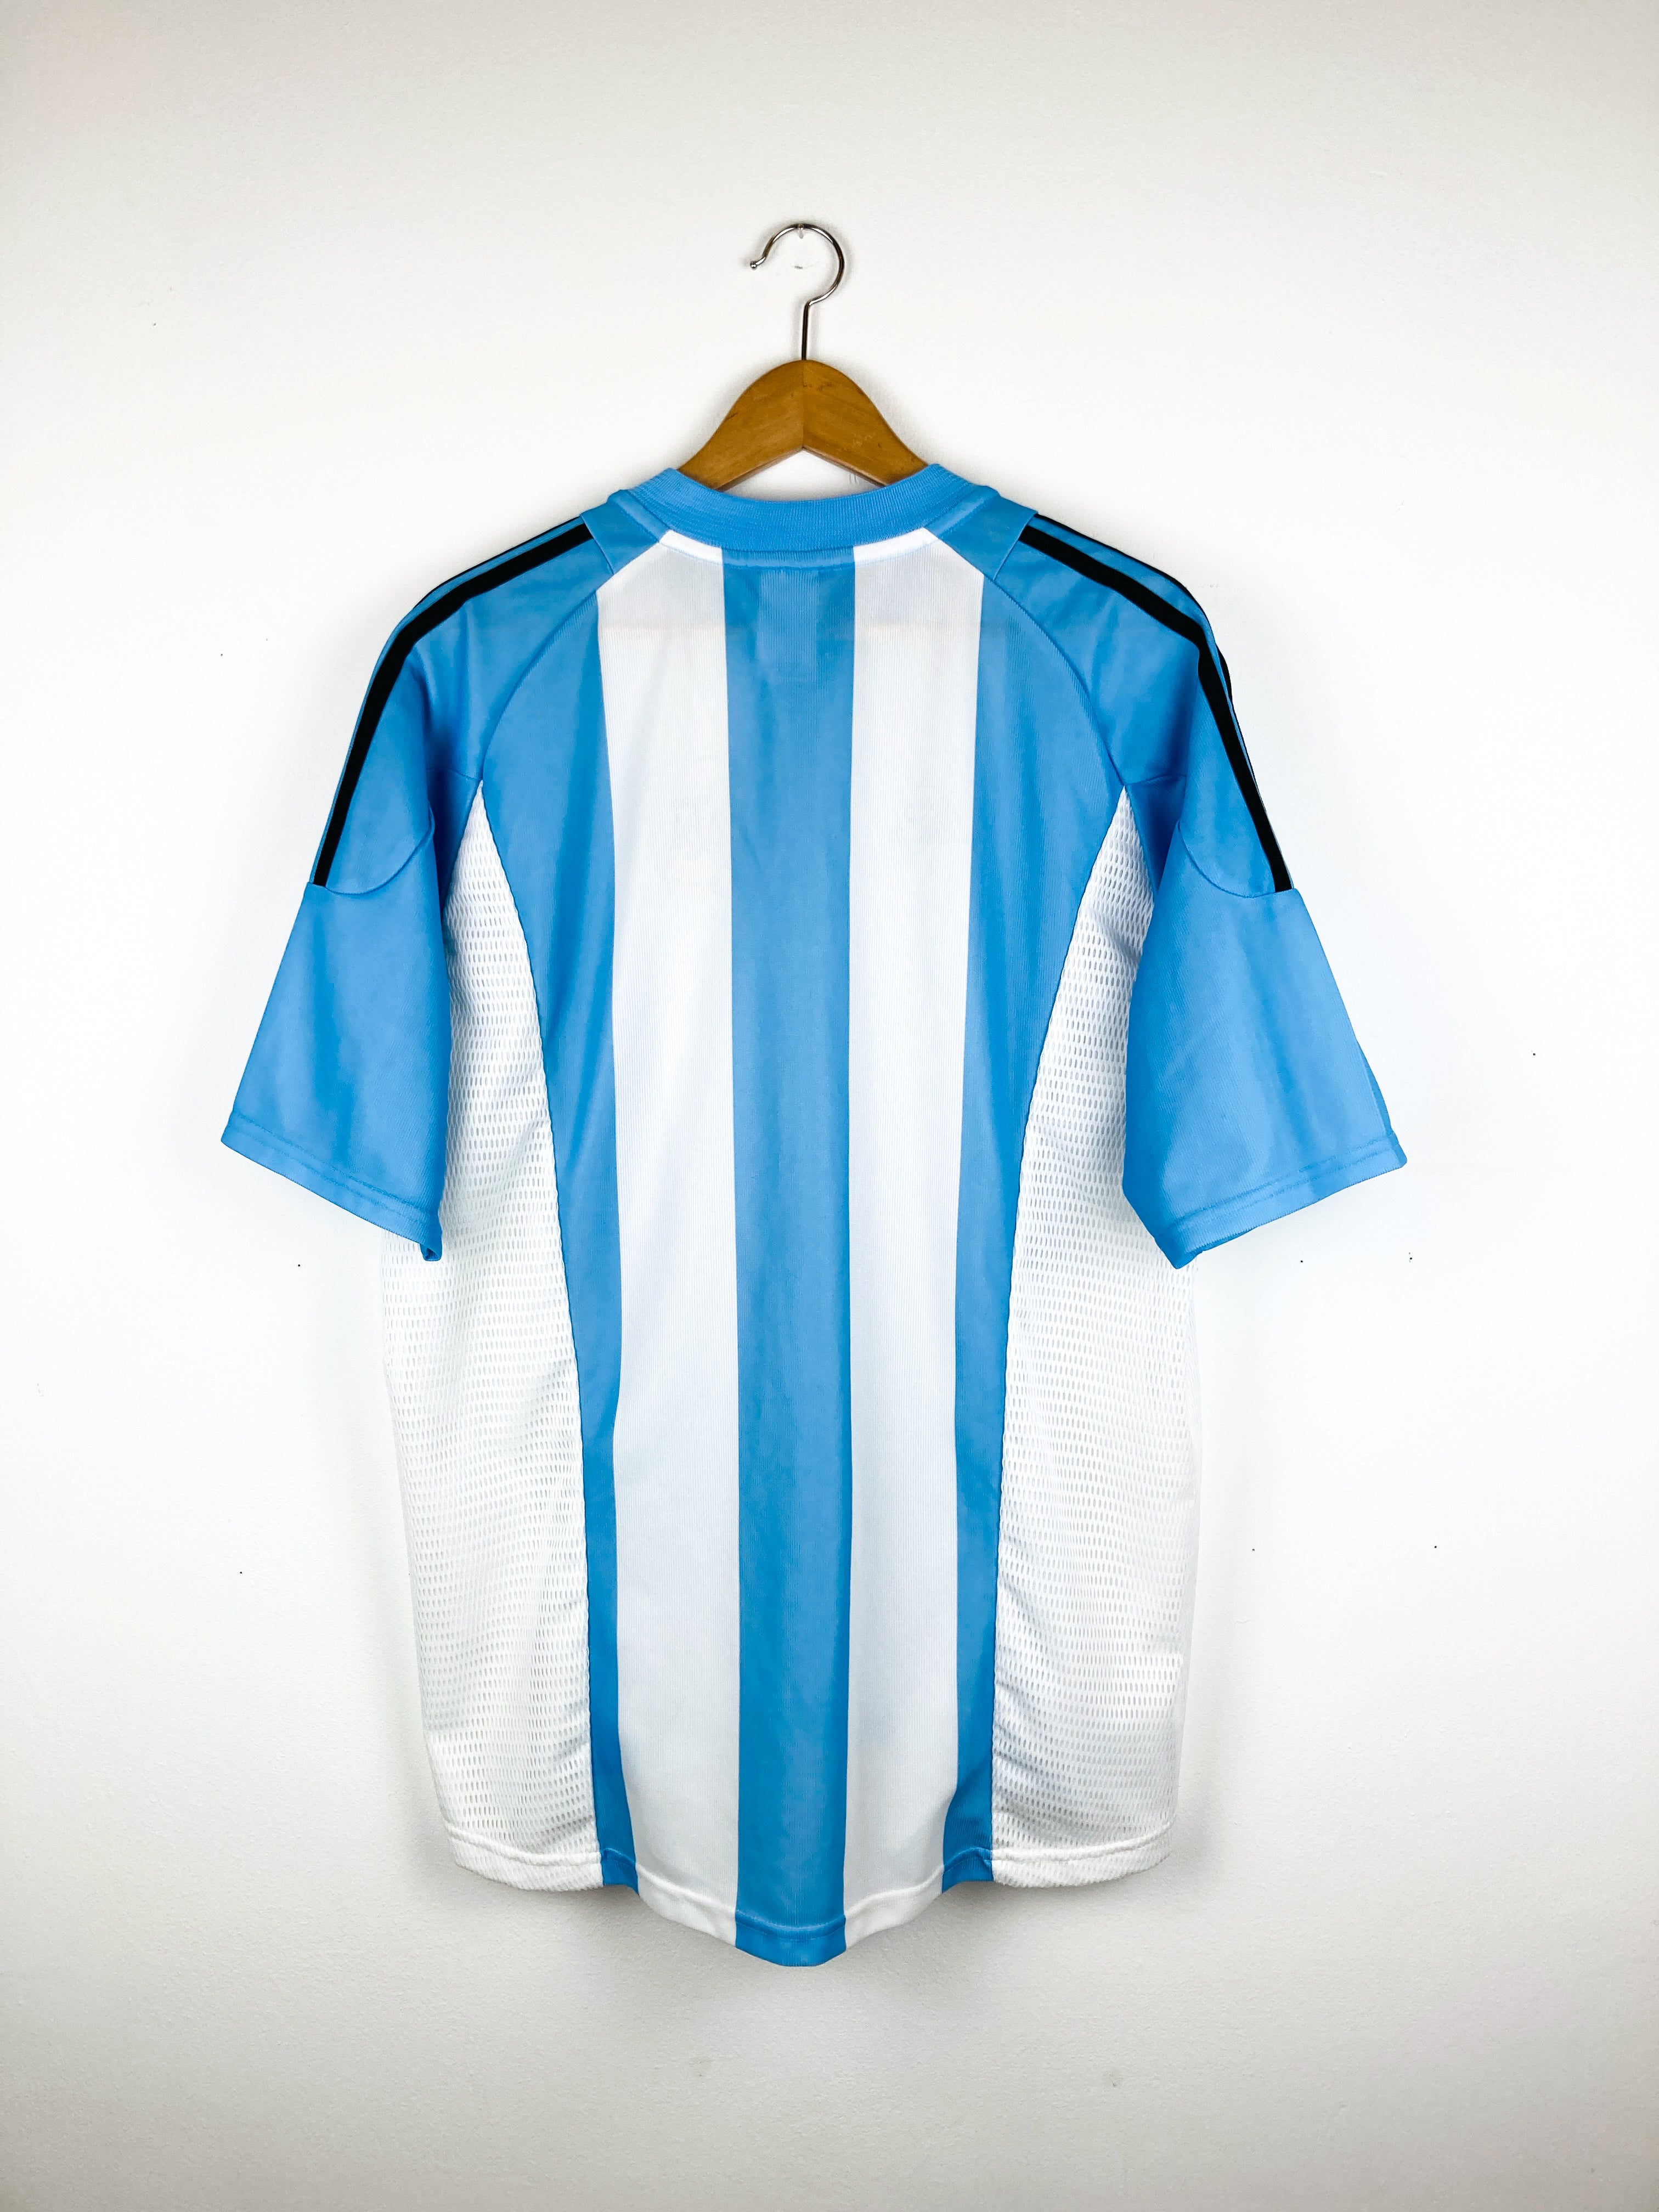 Stunner: Vintage Football Store — authentic soccer jerseys from 1990s